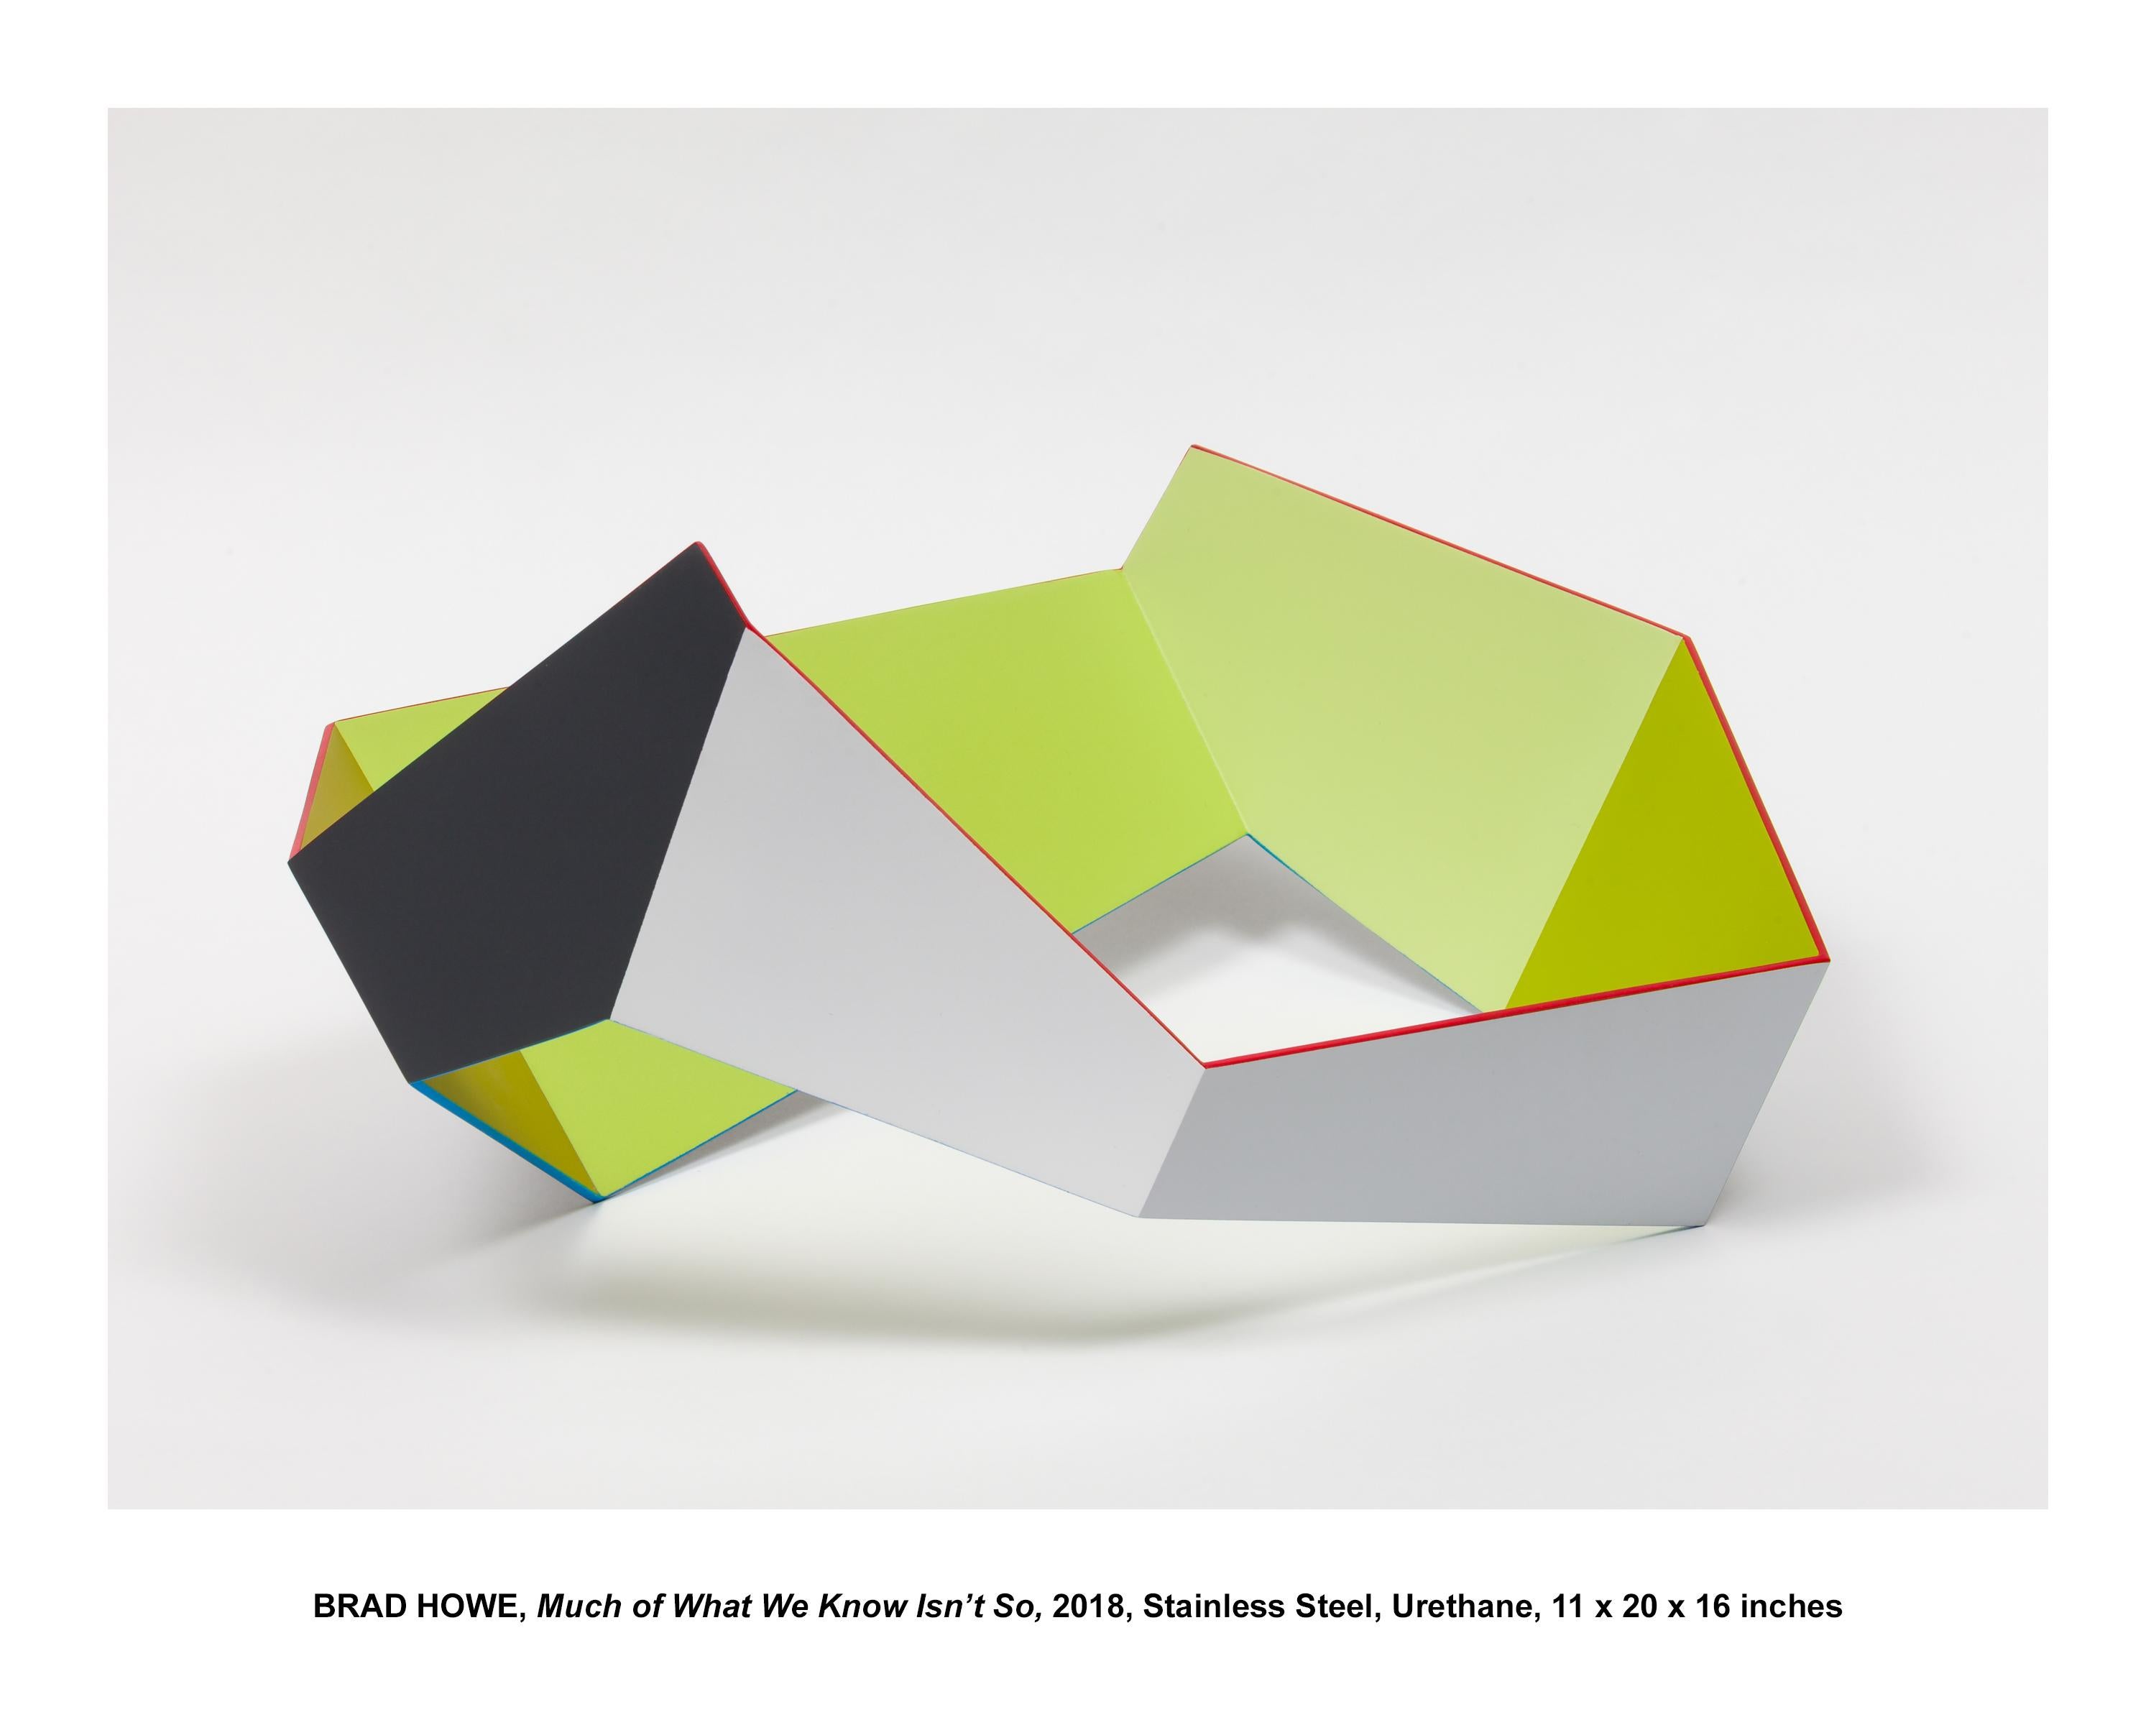 Brad Howe Abstract Sculpture - Much of What We Know Isn't So, Contemporary, Geometric, Minimal, Sculpture